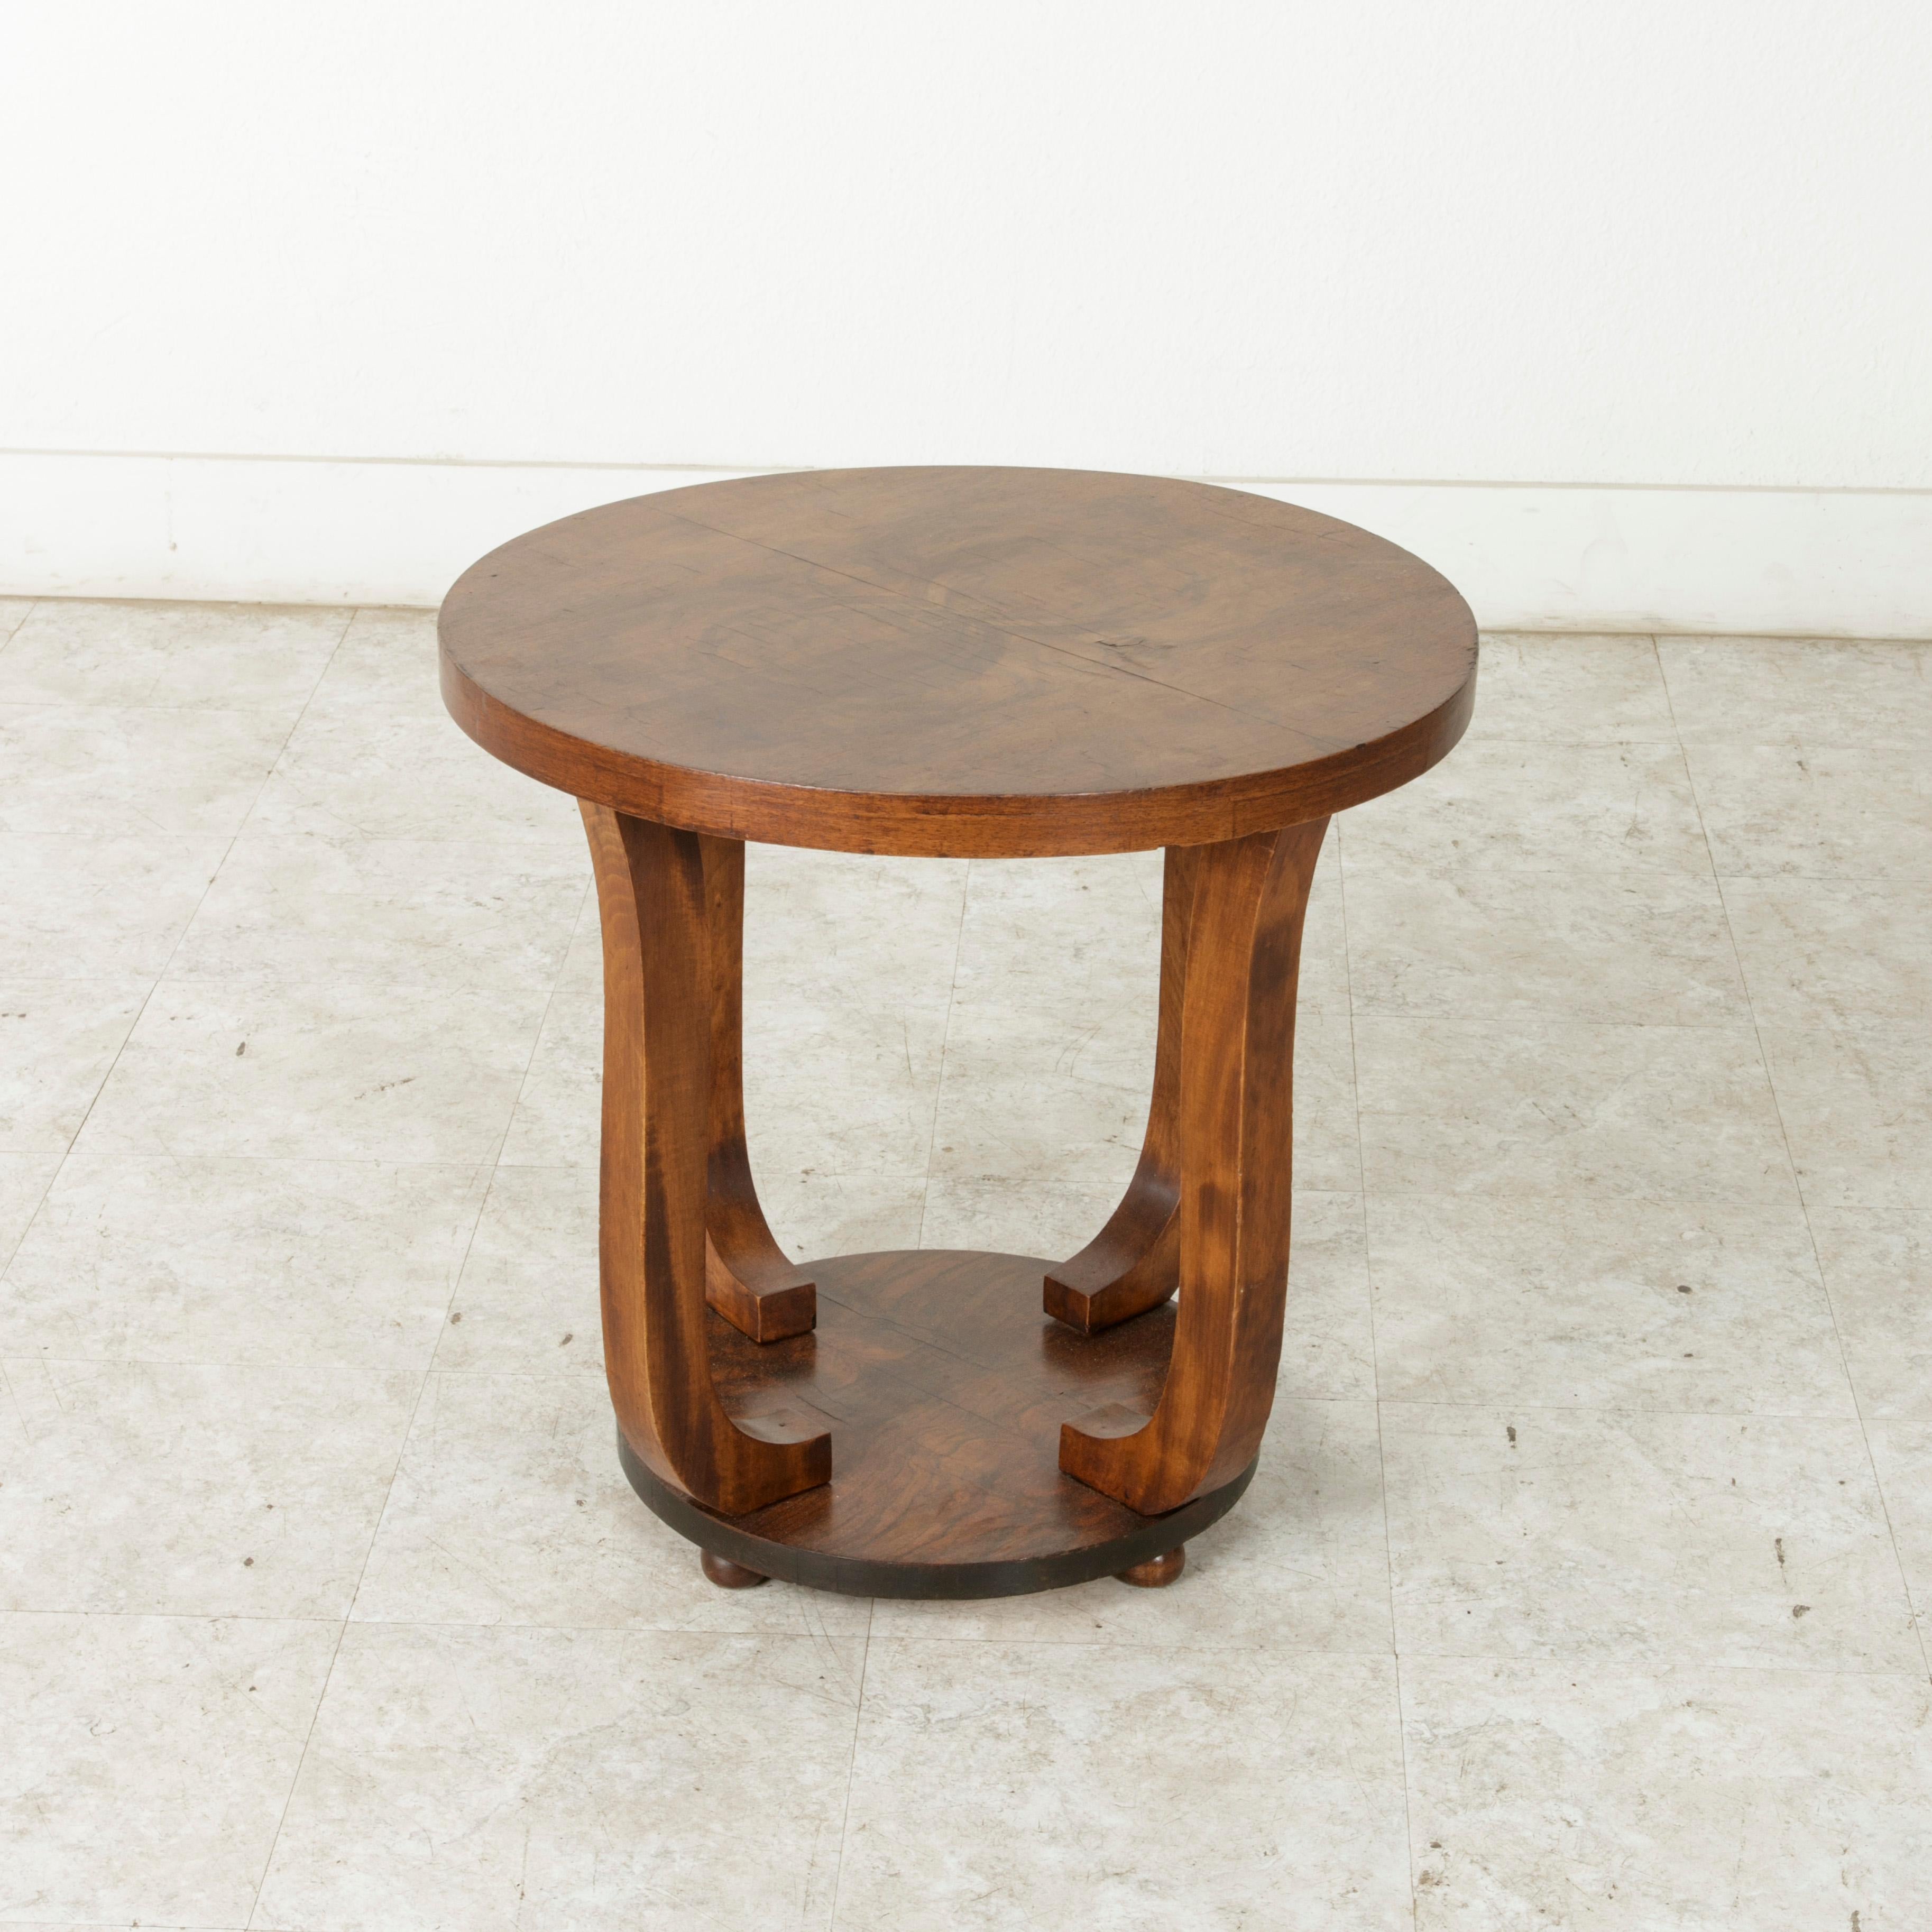 Early 20th Century French Art Deco Period Burl Walnut Guéridon or Side Table 5